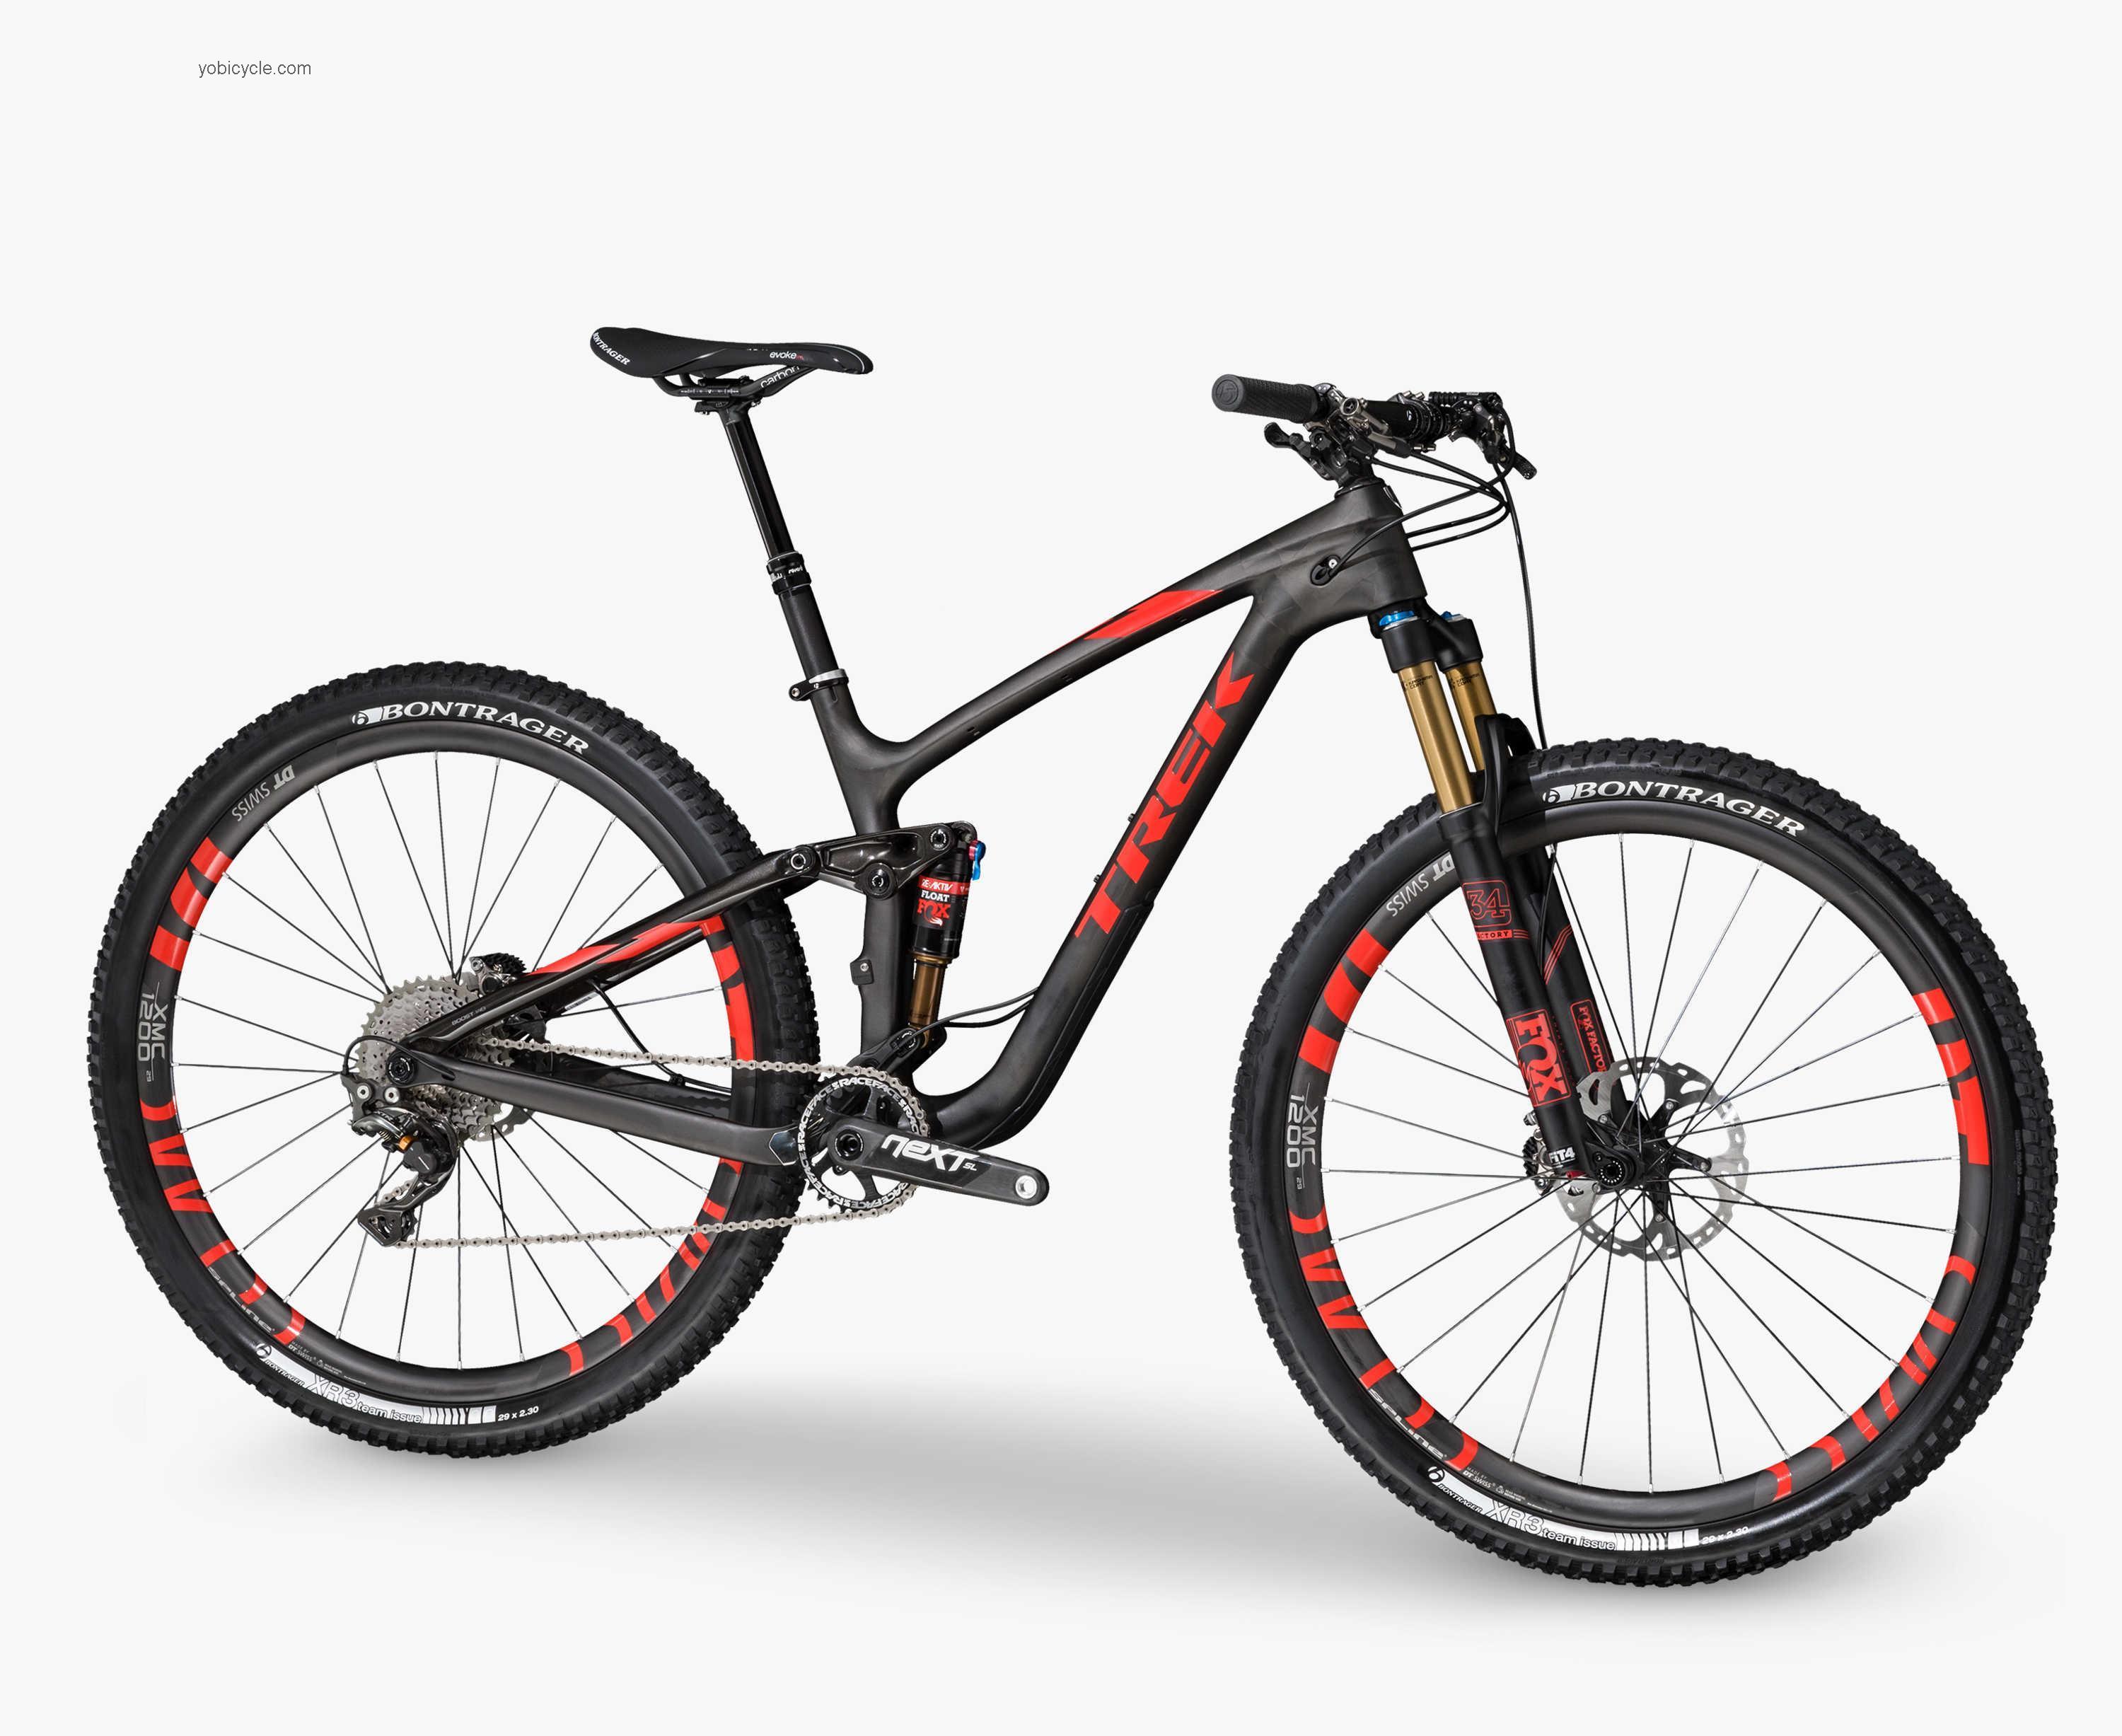 Trek Fuel EX 9.9 29 competitors and comparison tool online specs and performance